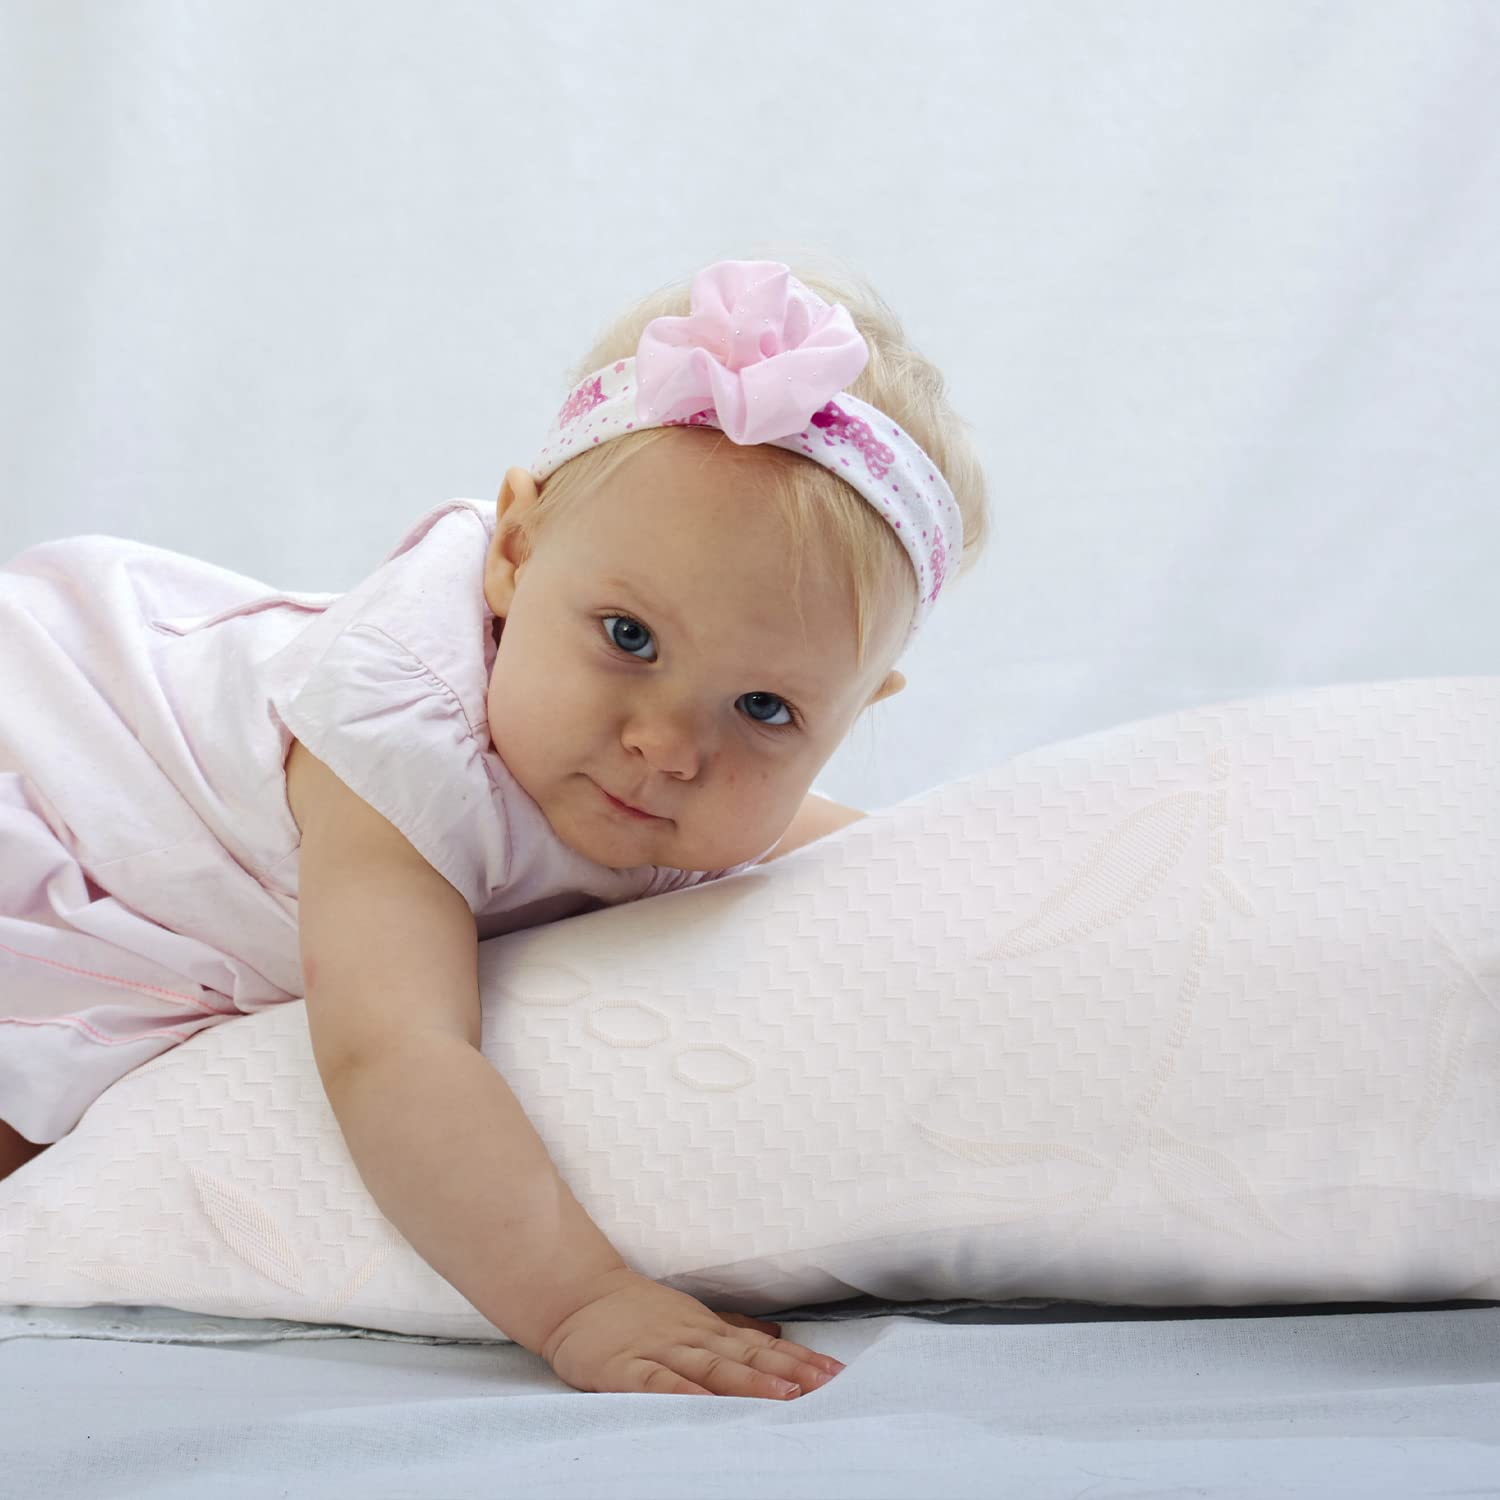 Buying Baby Pillows: How To Get Best Value For Money